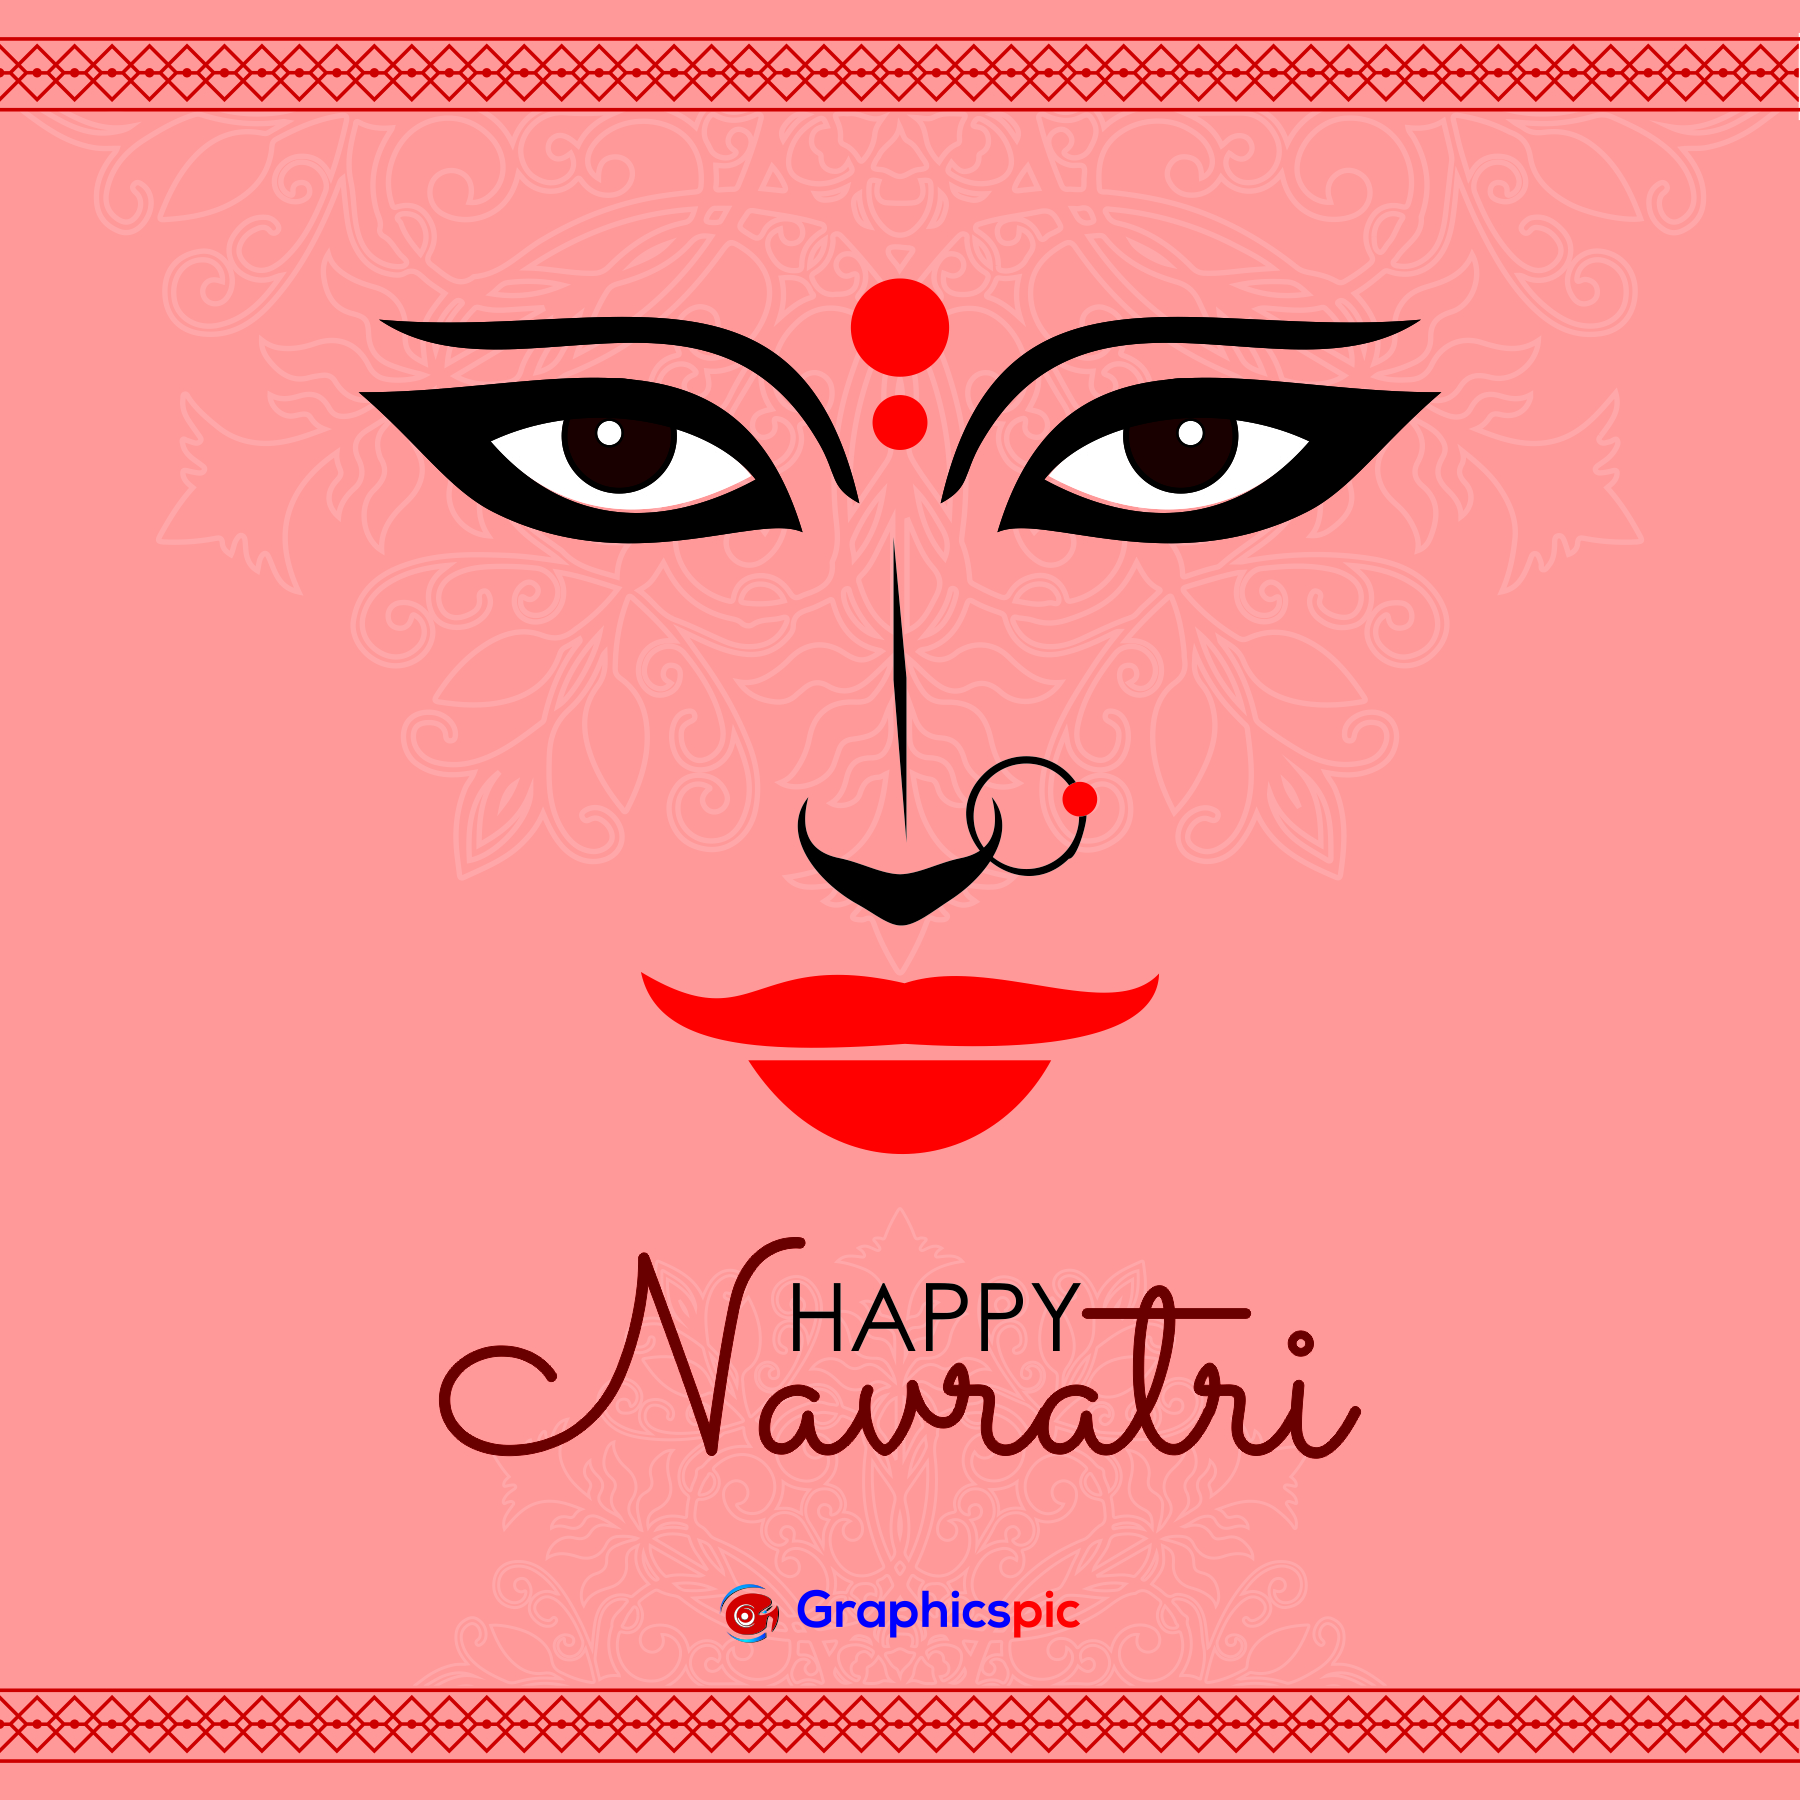 Happy durga pooja indian festival background image - Free Vector - Graphics  Pic